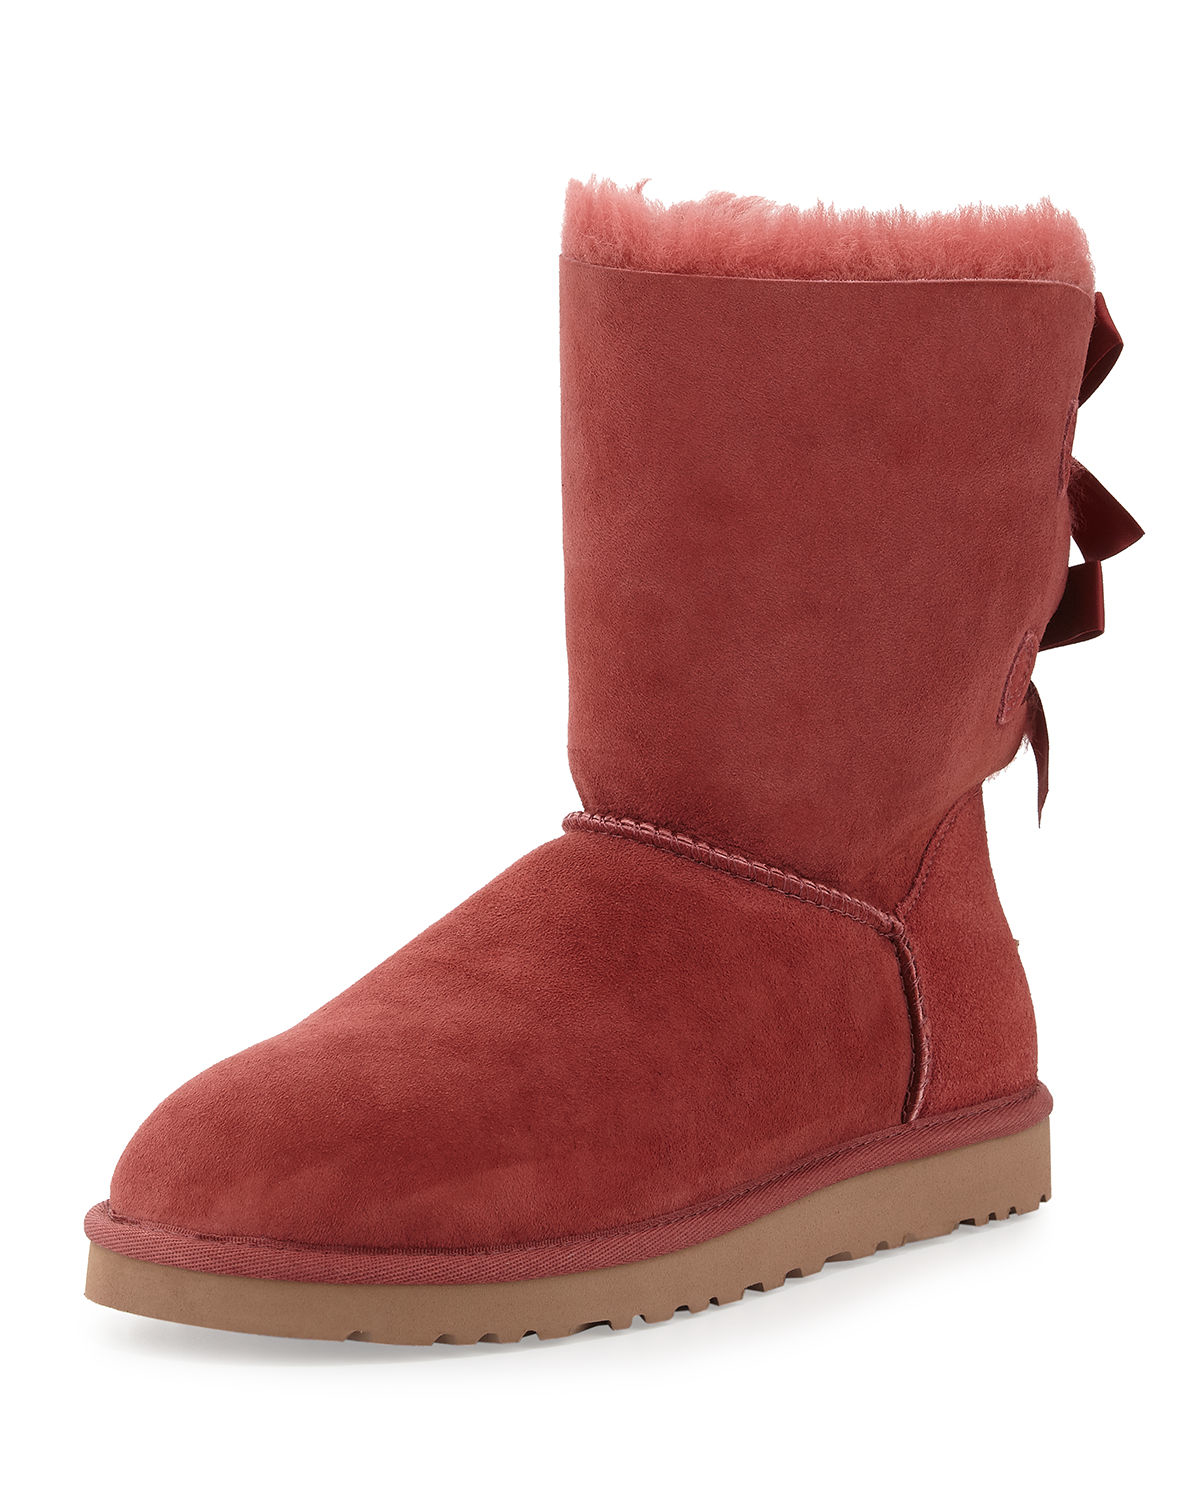 Ugg Bailey Bow-back Boot in Red (REDWOOD) - Save 32% | Lyst